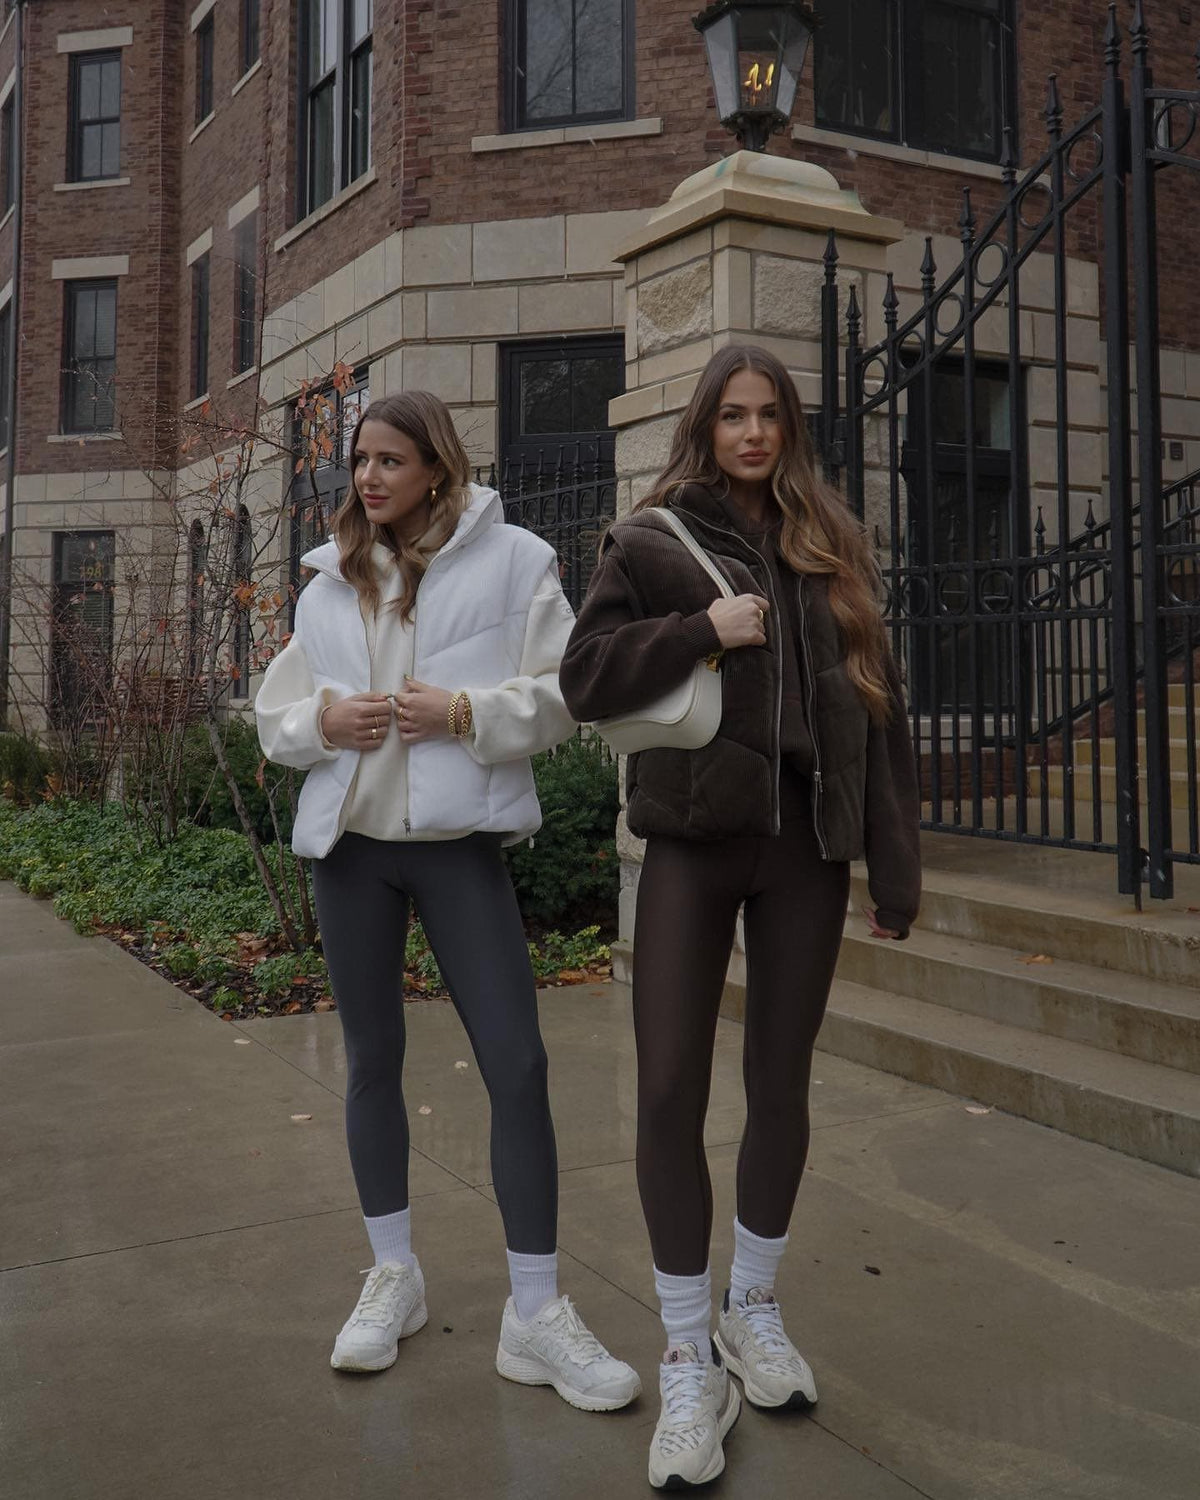  The twins of @babesontrend wearing matching ribbed puffer vests with a hoodie layered underneath and high-waisted leggings on the bottom while in front of a brick and stone building. 